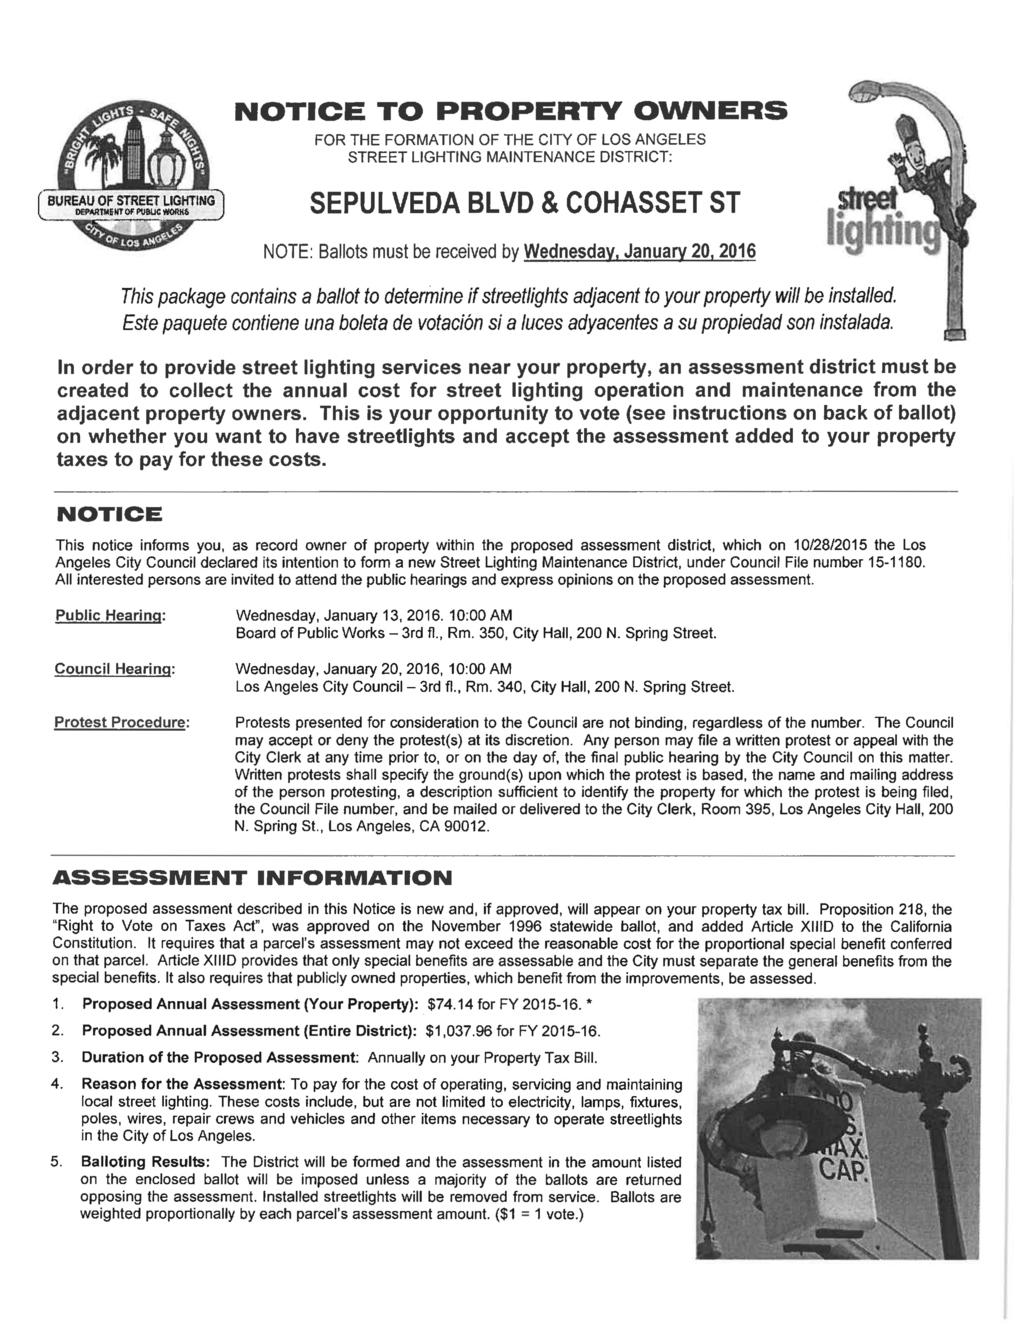 NOTICE TO PROPERTY OWNERS a FOR THE FORMATION OF THE CITY OF LOS ANGELES STREET LIGHTING MAINTENANCE DISTRICT: BUREAU OF STREET LIGHTING MPARttlEHTOF RUBUC WORKS SEPULVEDA BLVD & COHASSET ST NOTE: